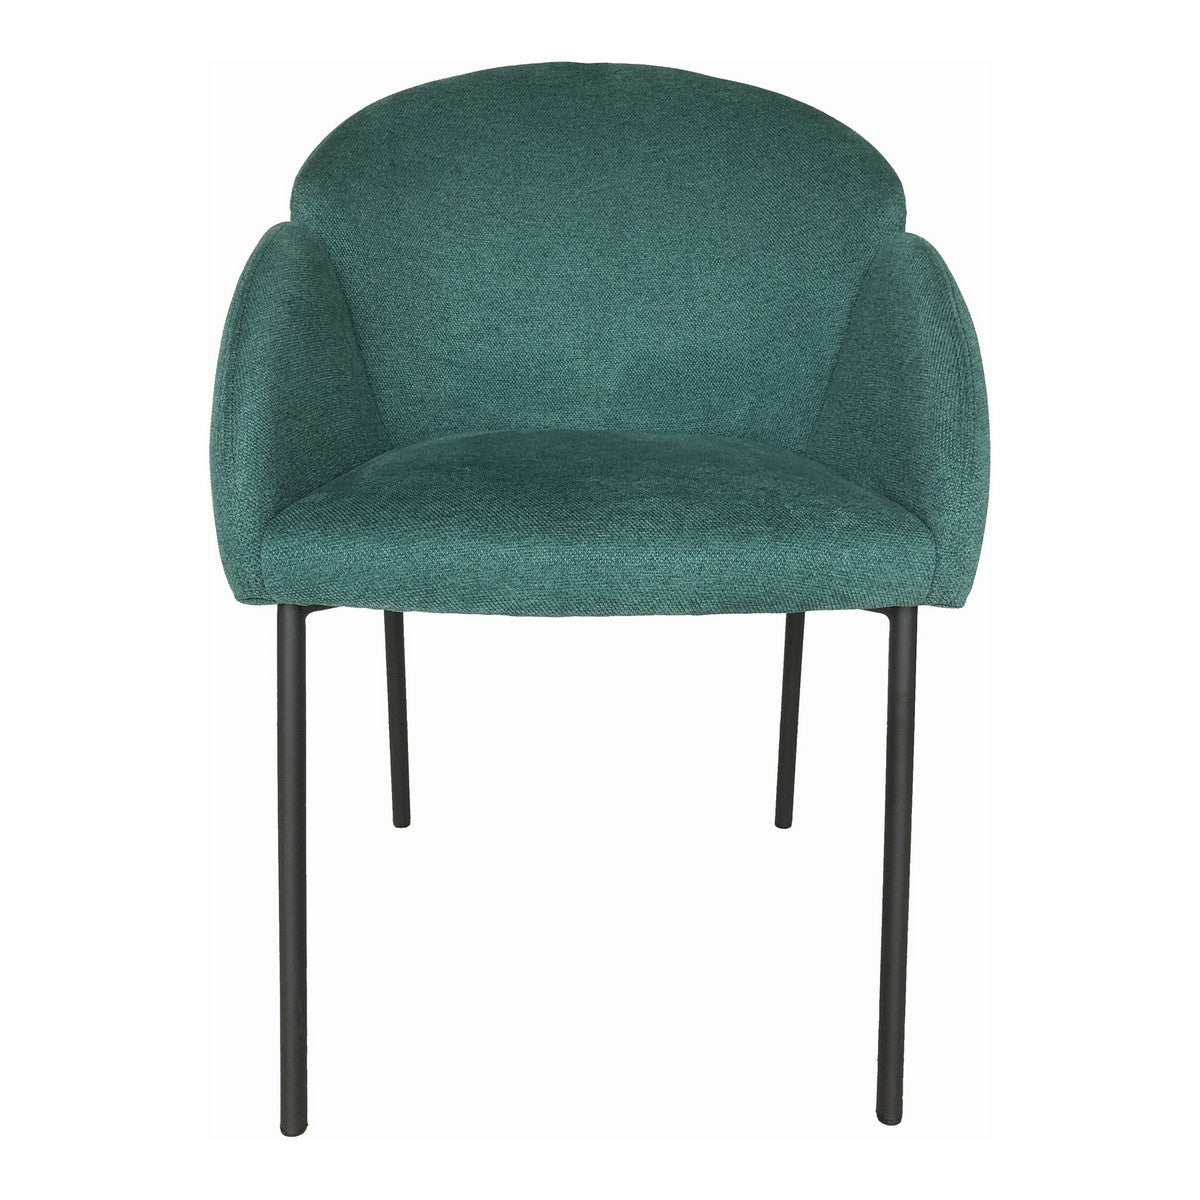 Moe's Home Collection Gigi Dining Chair Green-Set of Two - HK-1018-16 - Moe's Home Collection - Dining Chairs - Minimal And Modern - 1